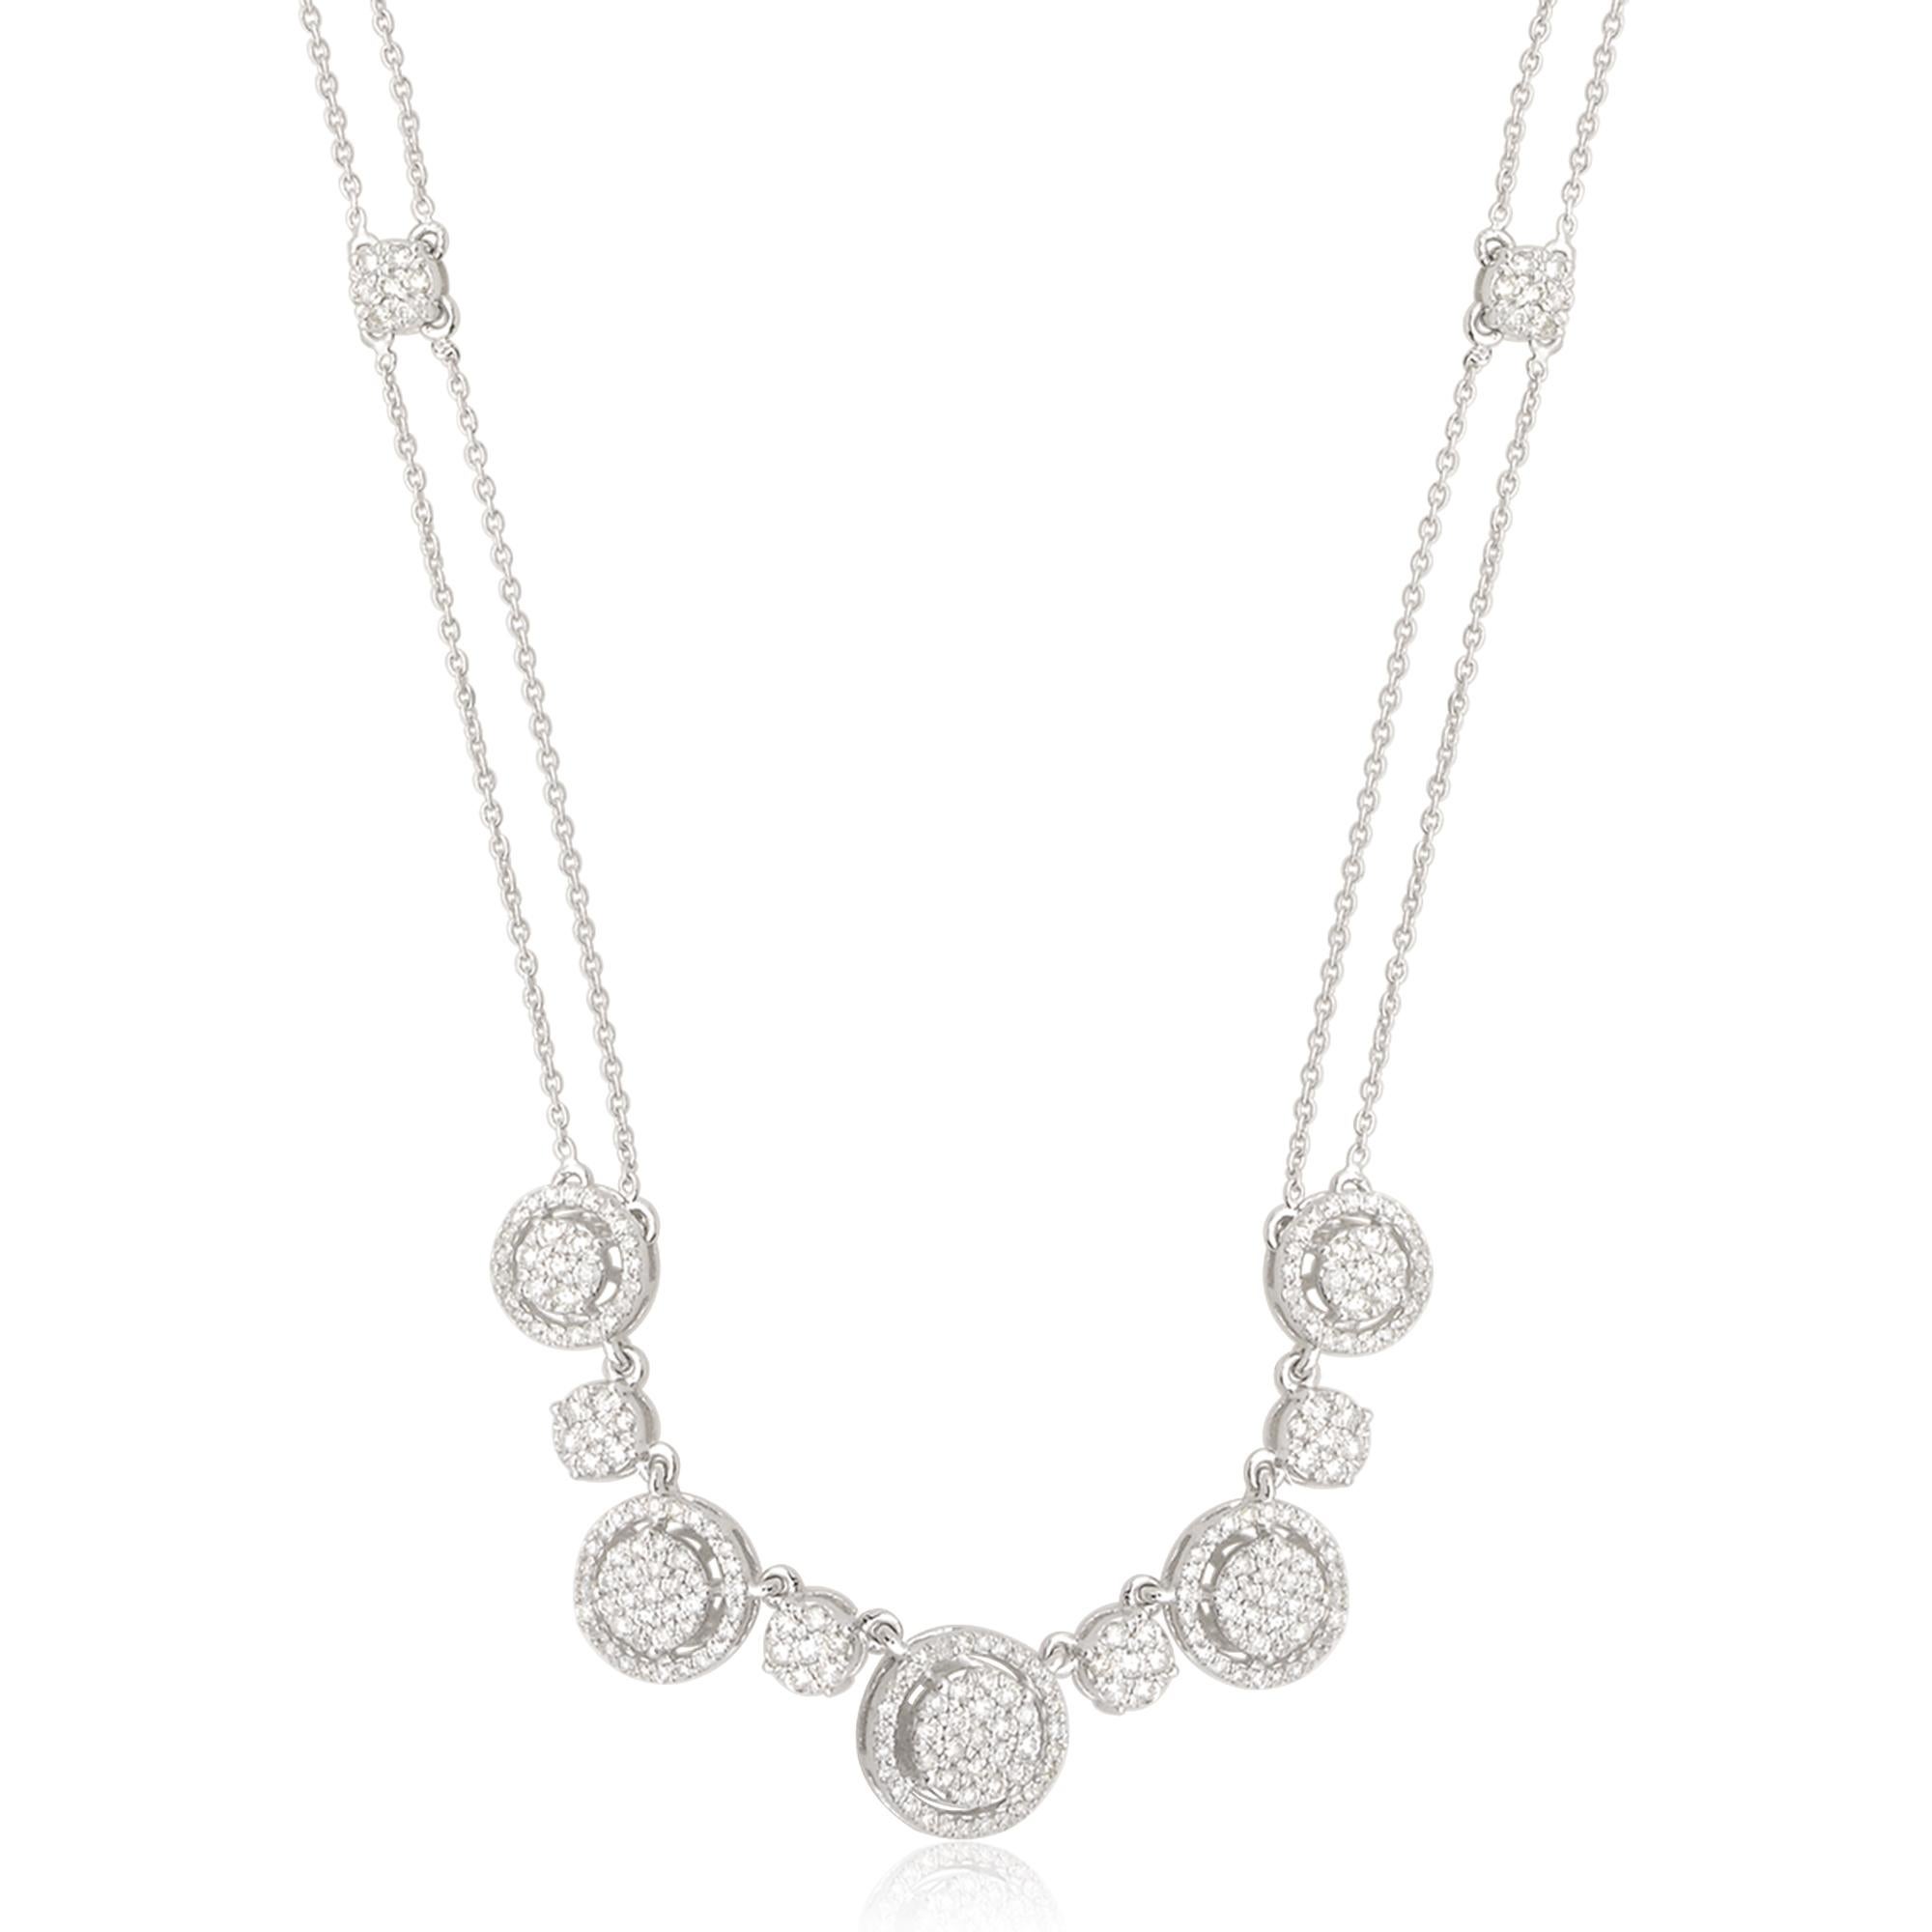 The necklace is designed with versatility in mind. The diamond pendant hangs delicately from a 14 karat white gold chain, which is adjustable to different lengths. This allows for customization, ensuring a comfortable fit and the ability to style